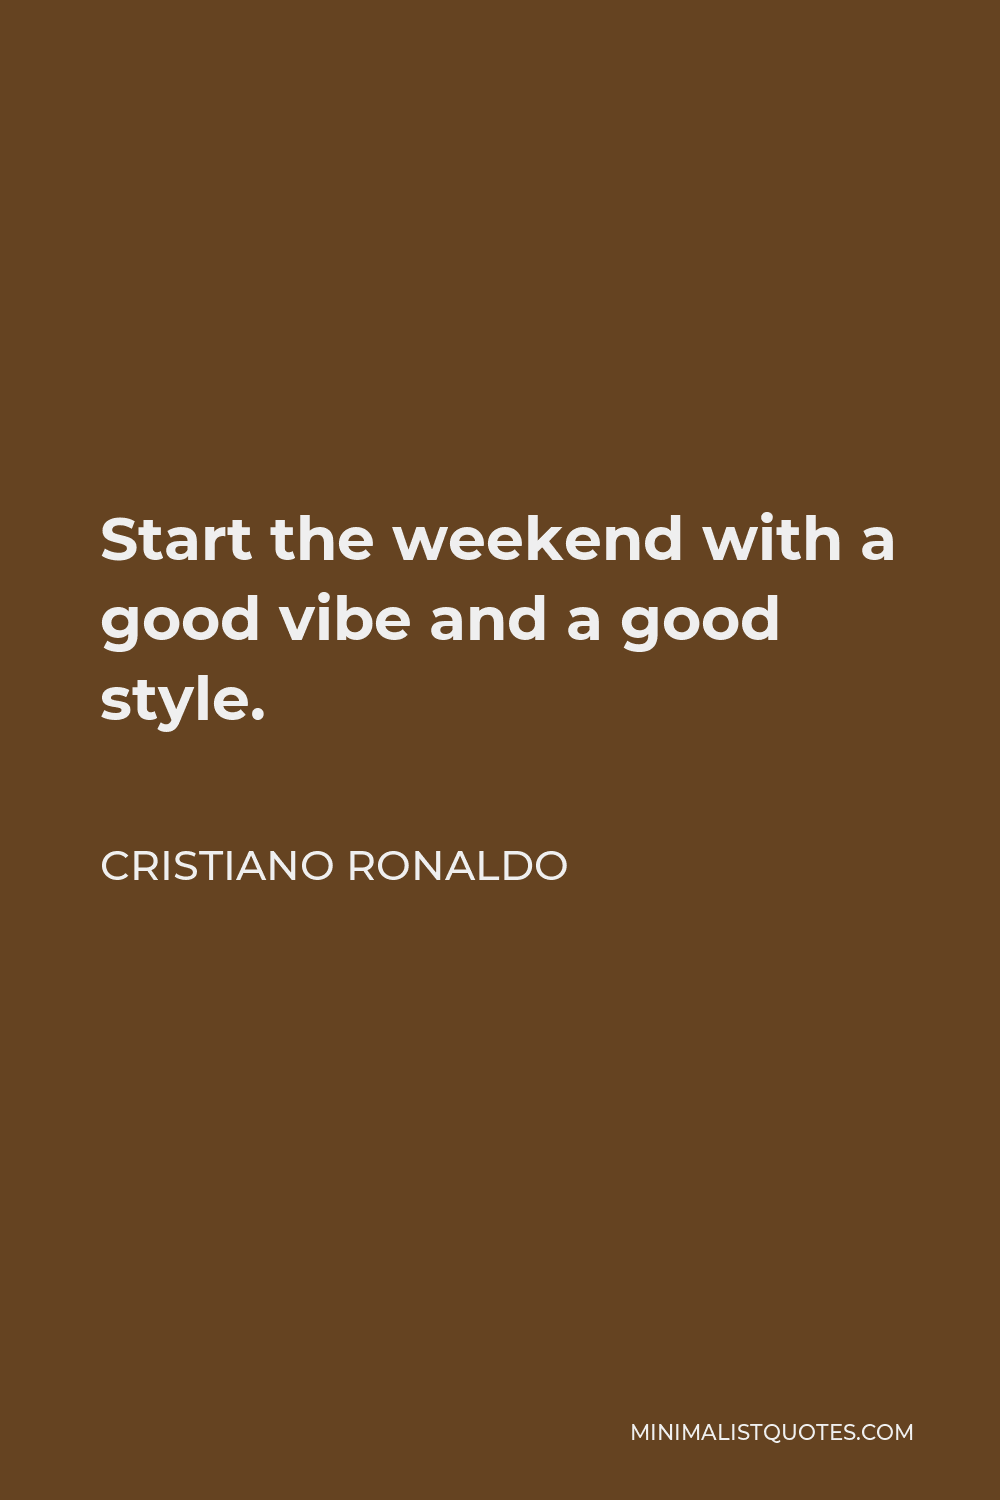 Cristiano Ronaldo Quote - Start the weekend with a good vibe and a good style.